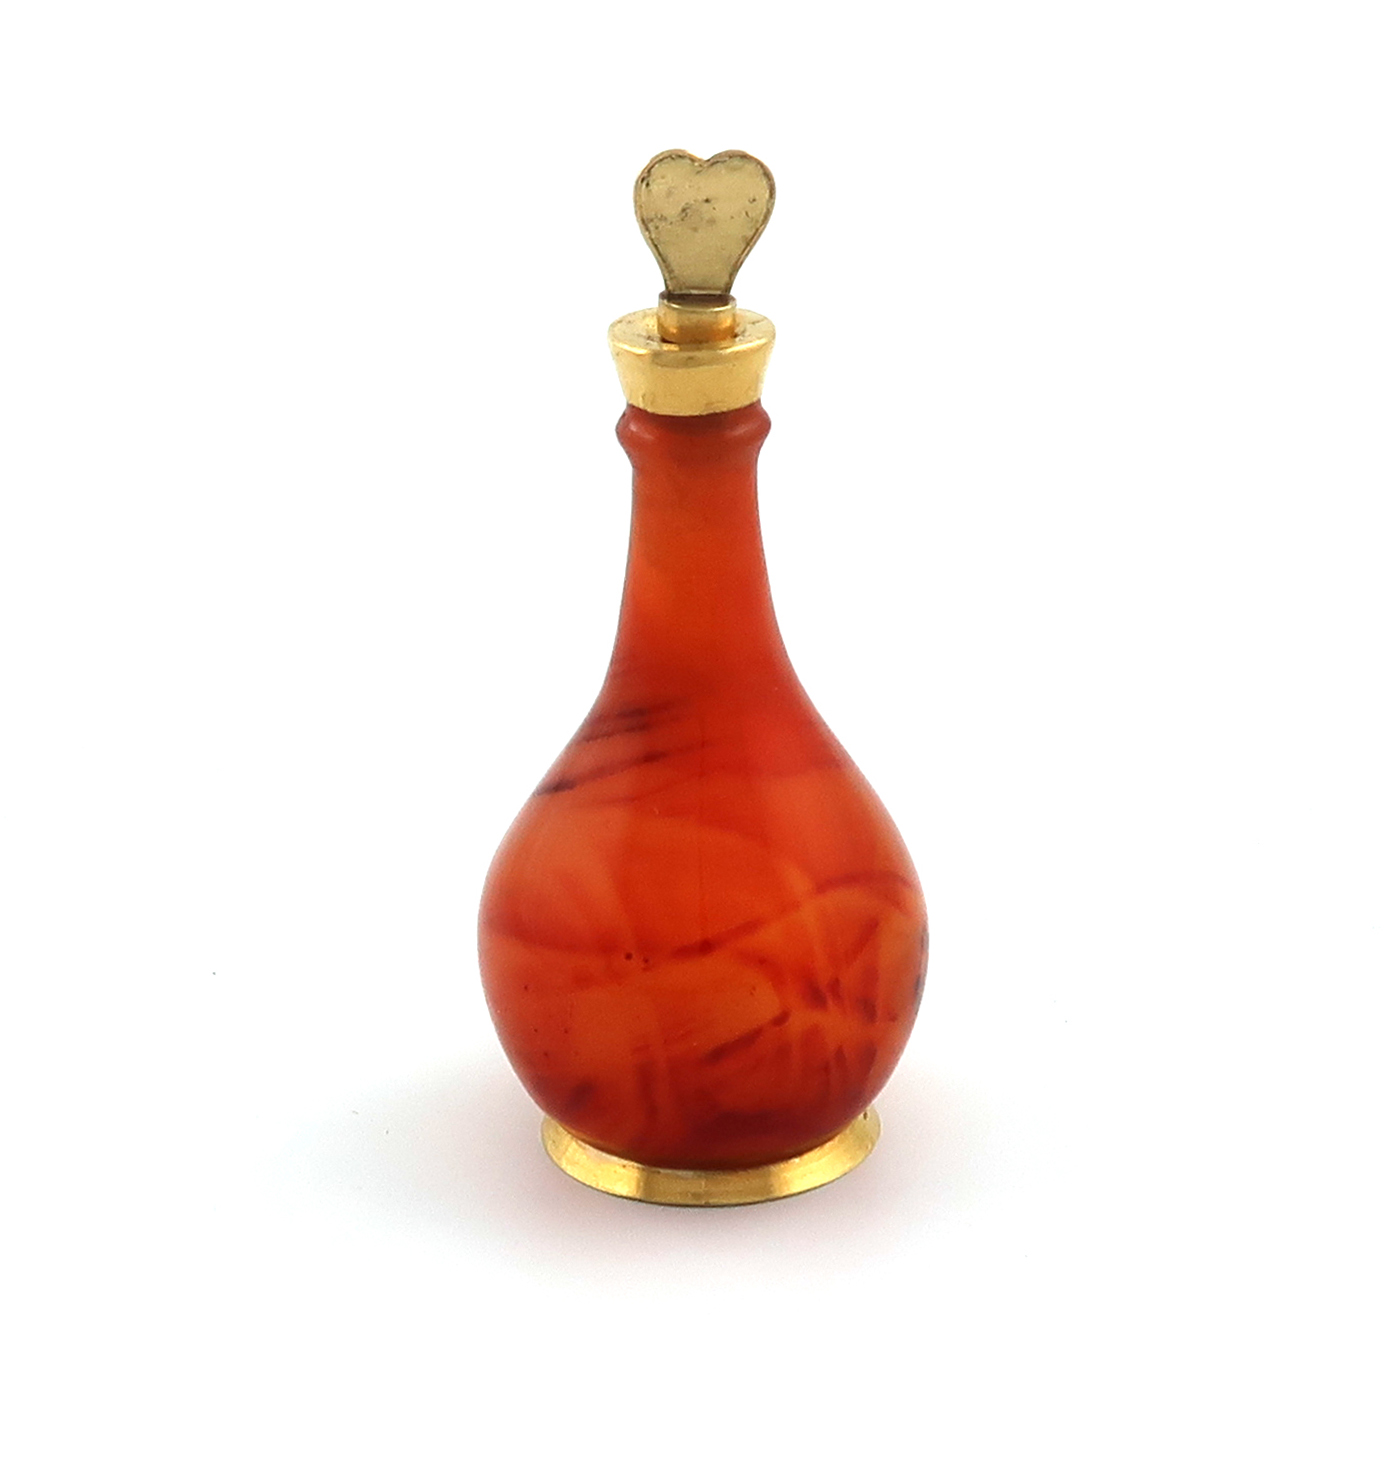 A gold-mounted agate scent flask, unmarked, probably early-19th century, baluster form, plain